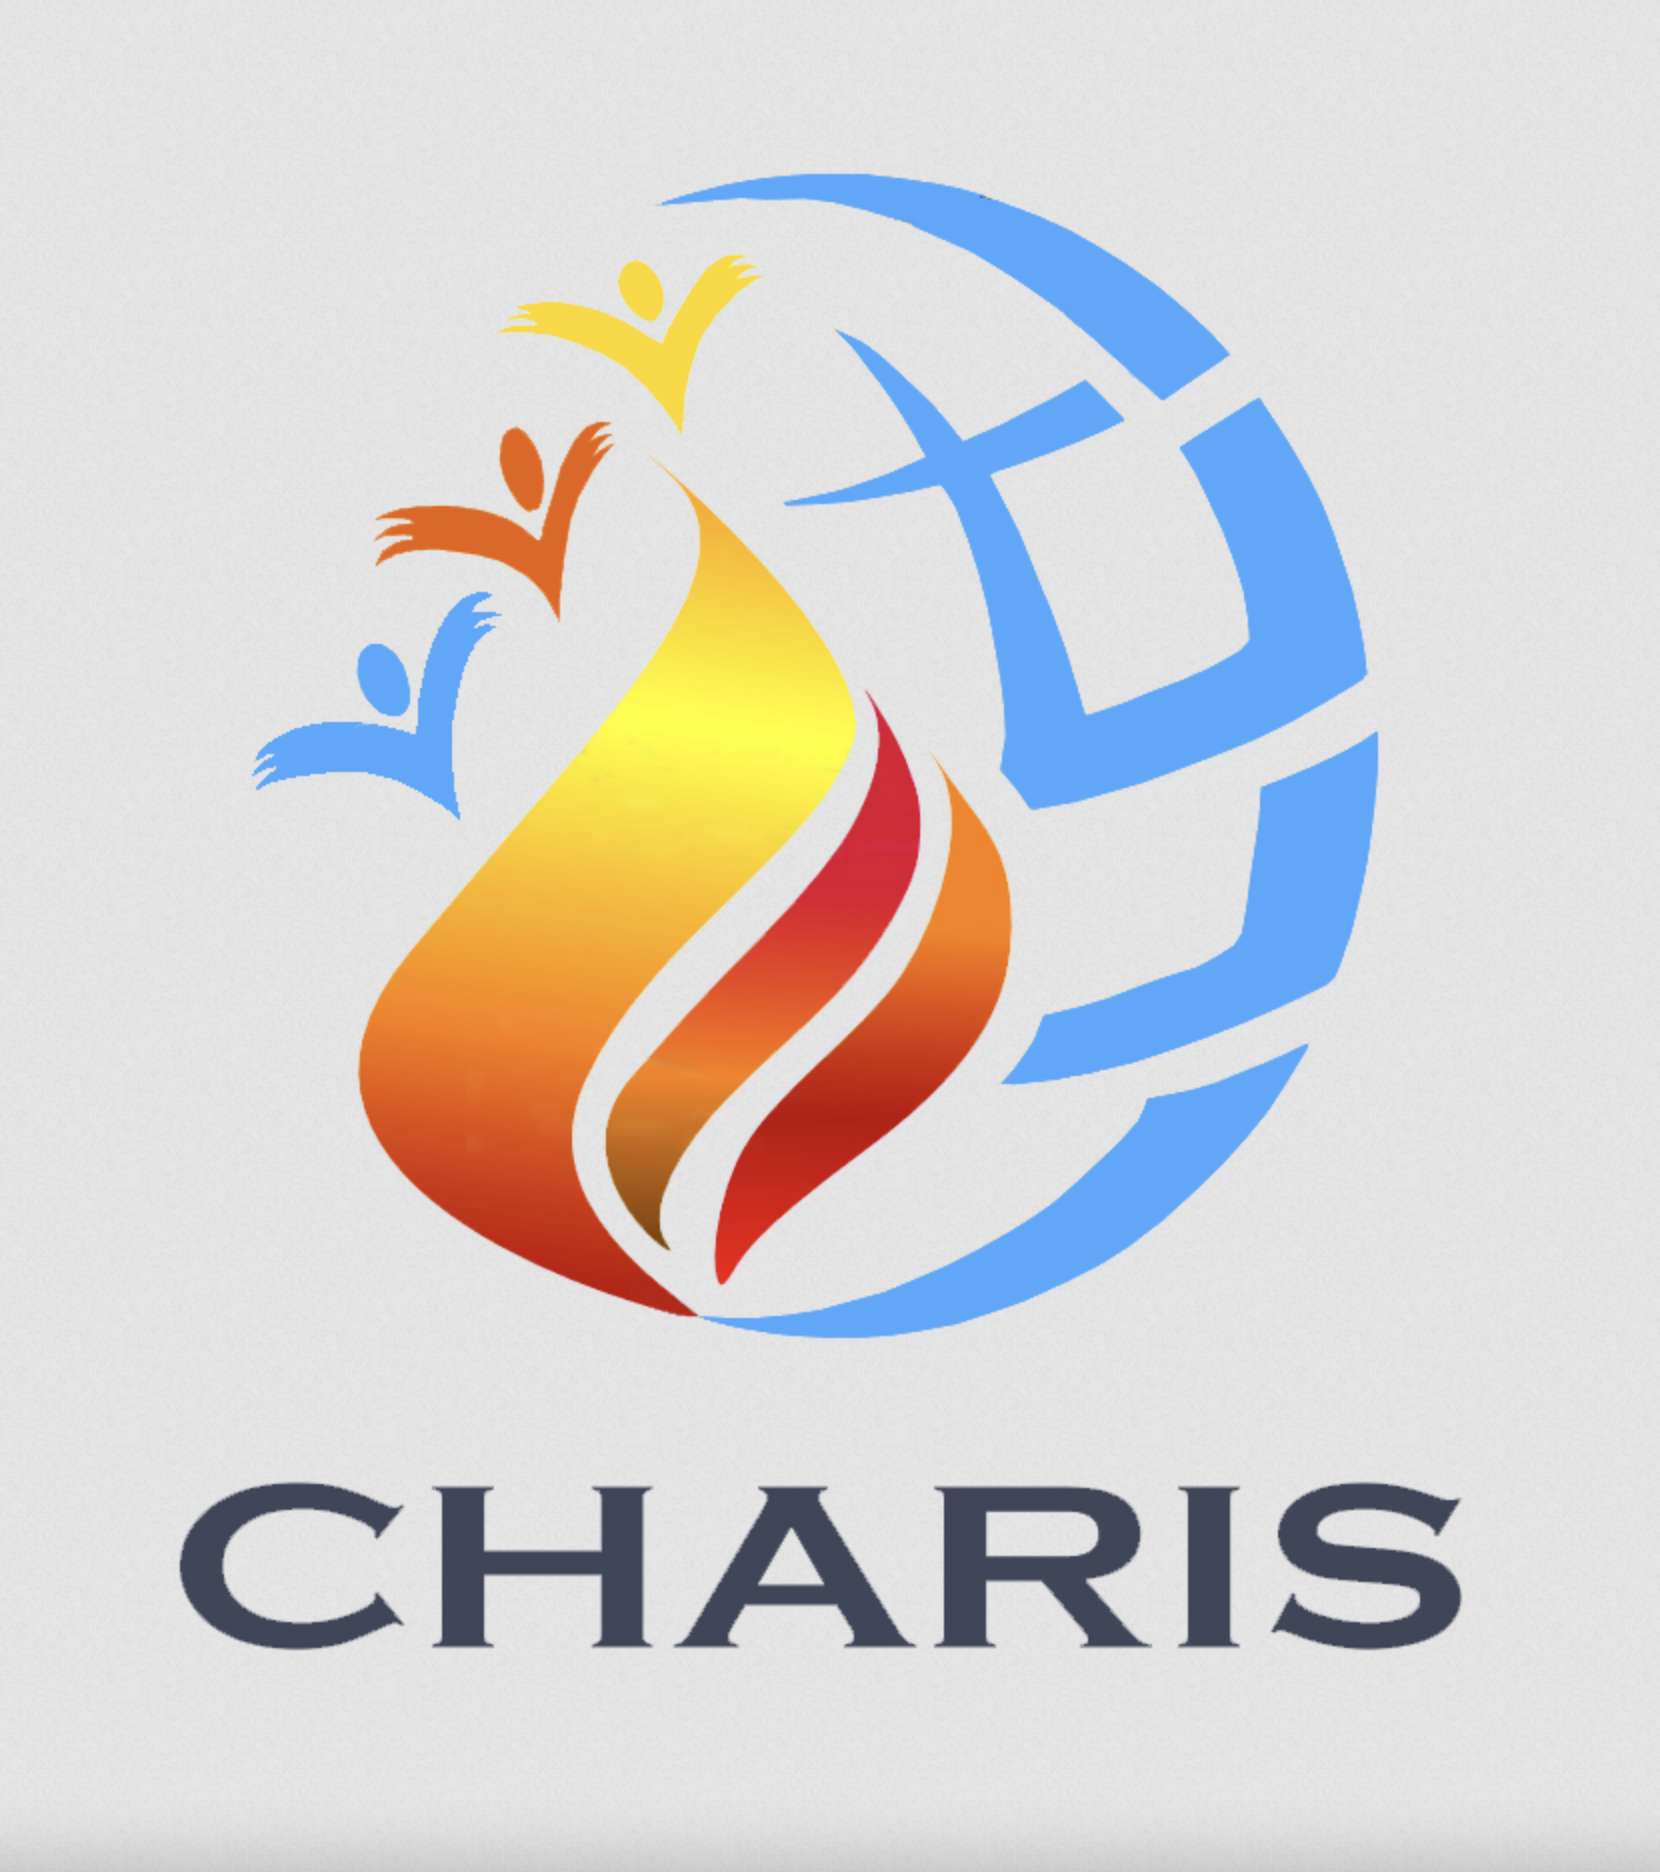 CHARIS International -- Questions and Answers (Q & A's)